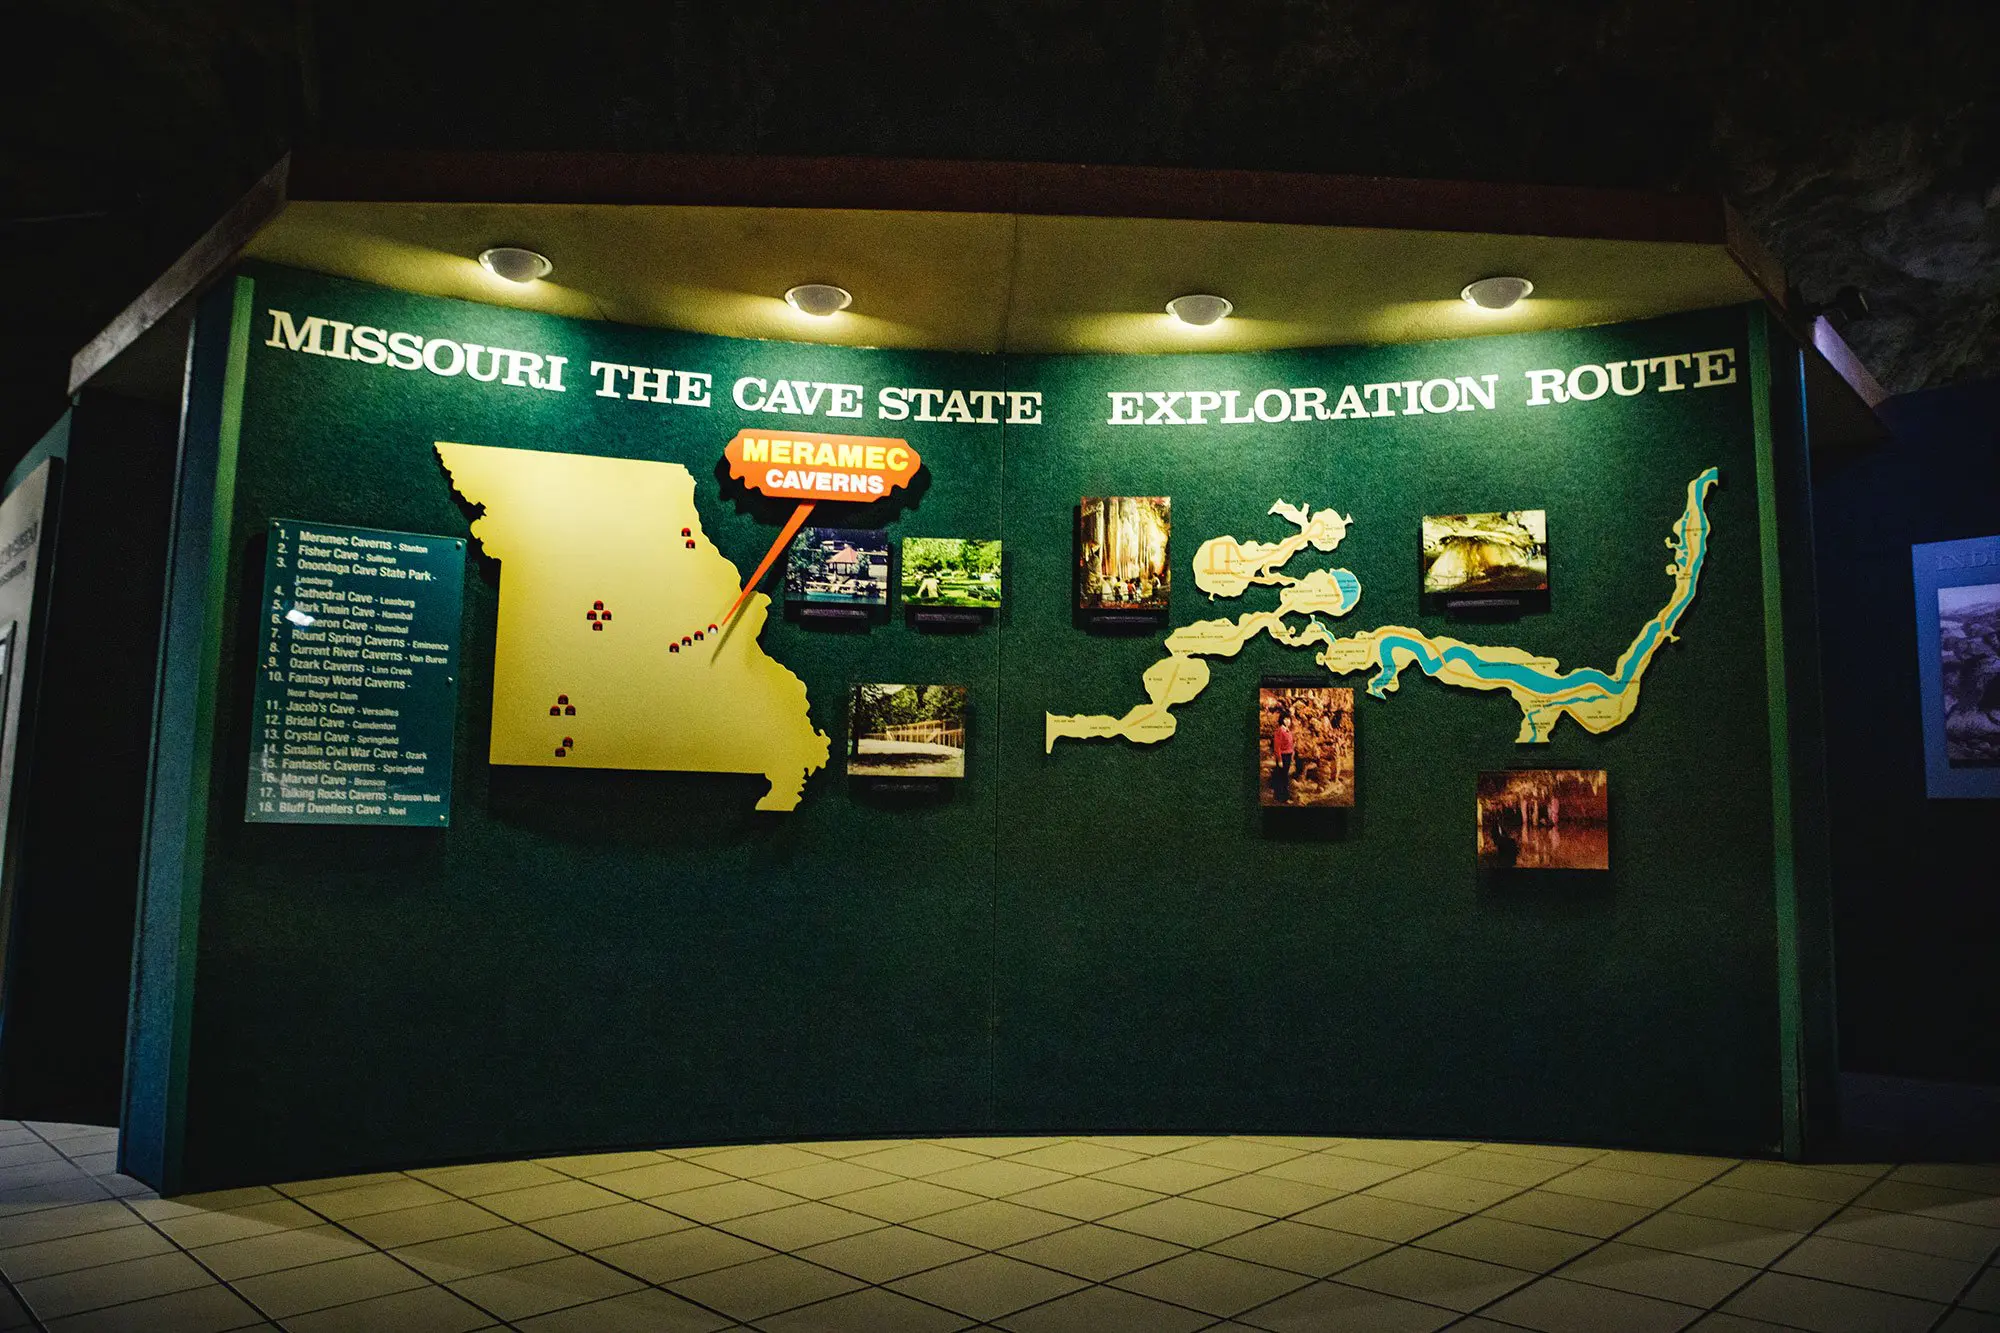 Museum board of the Meramec Caverns exploration route and all of the caves in Missouri